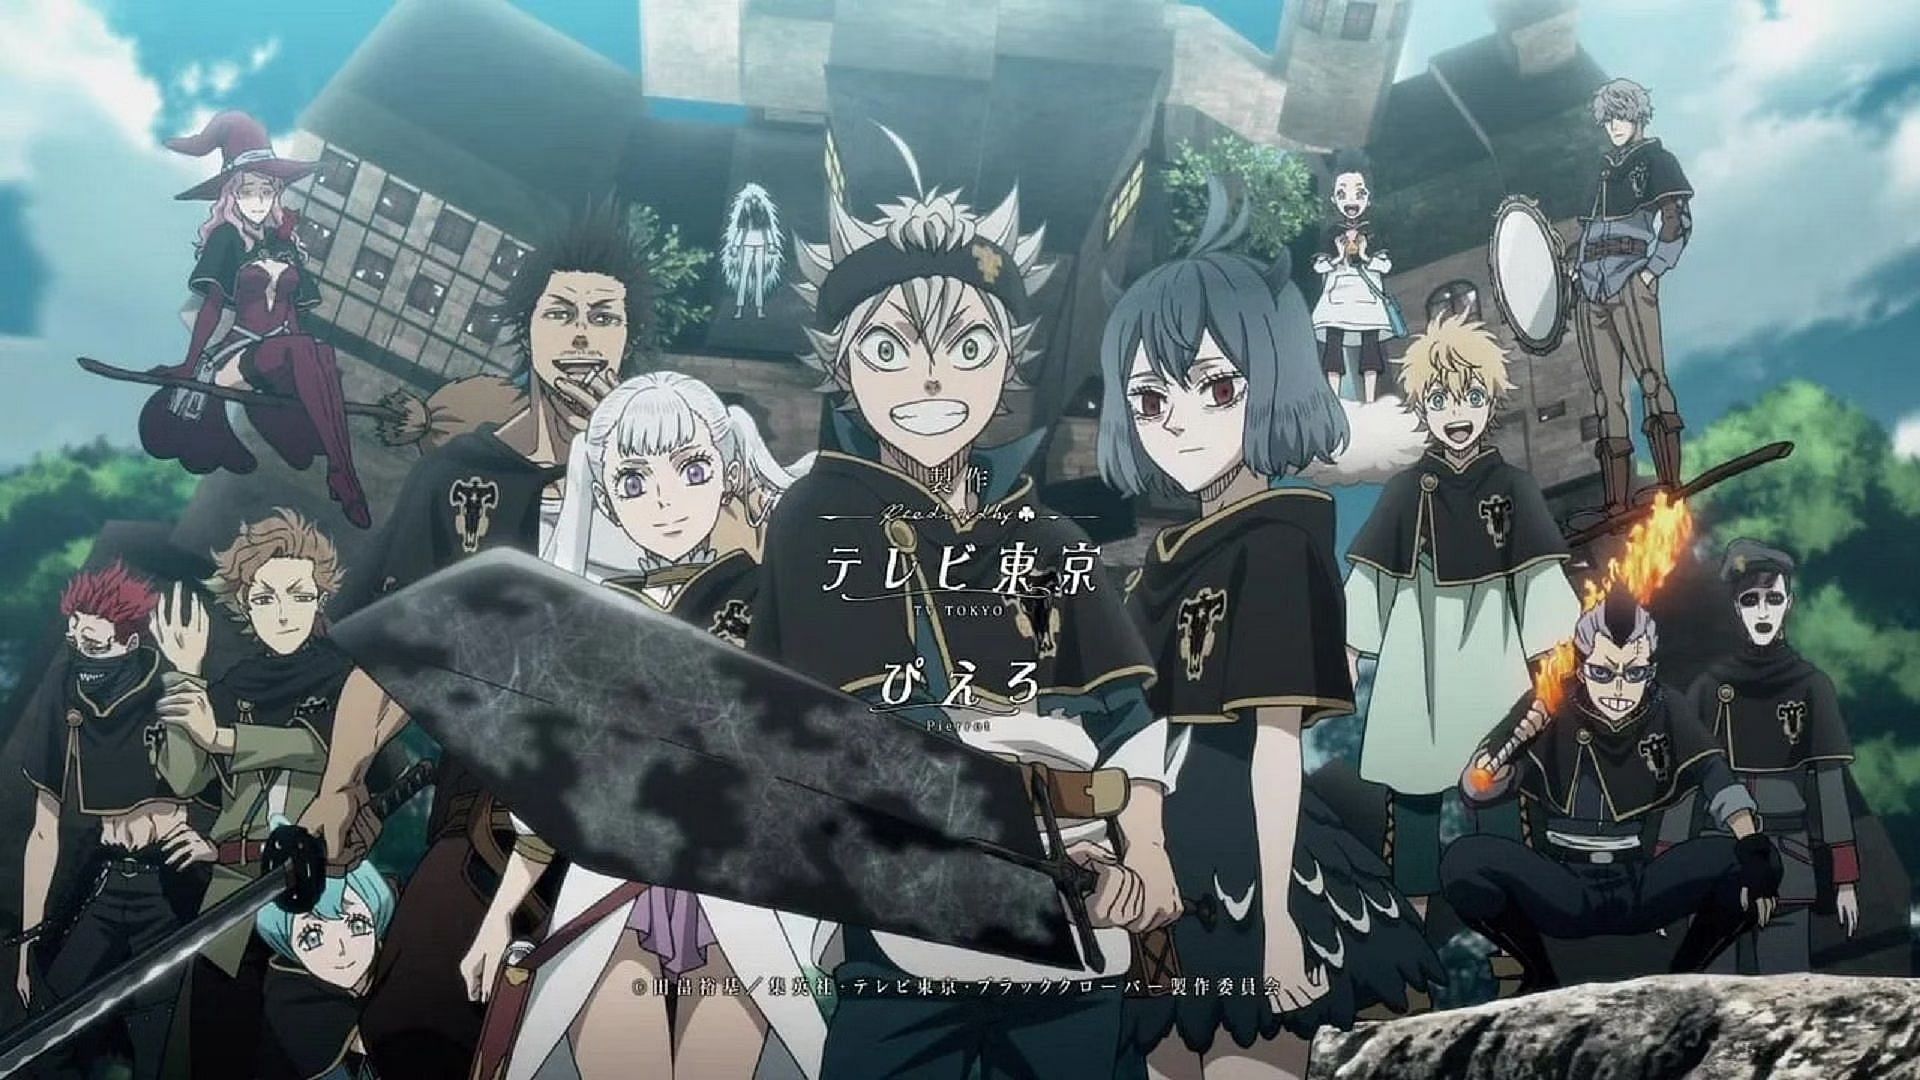 Will Black Clover end this year? explained